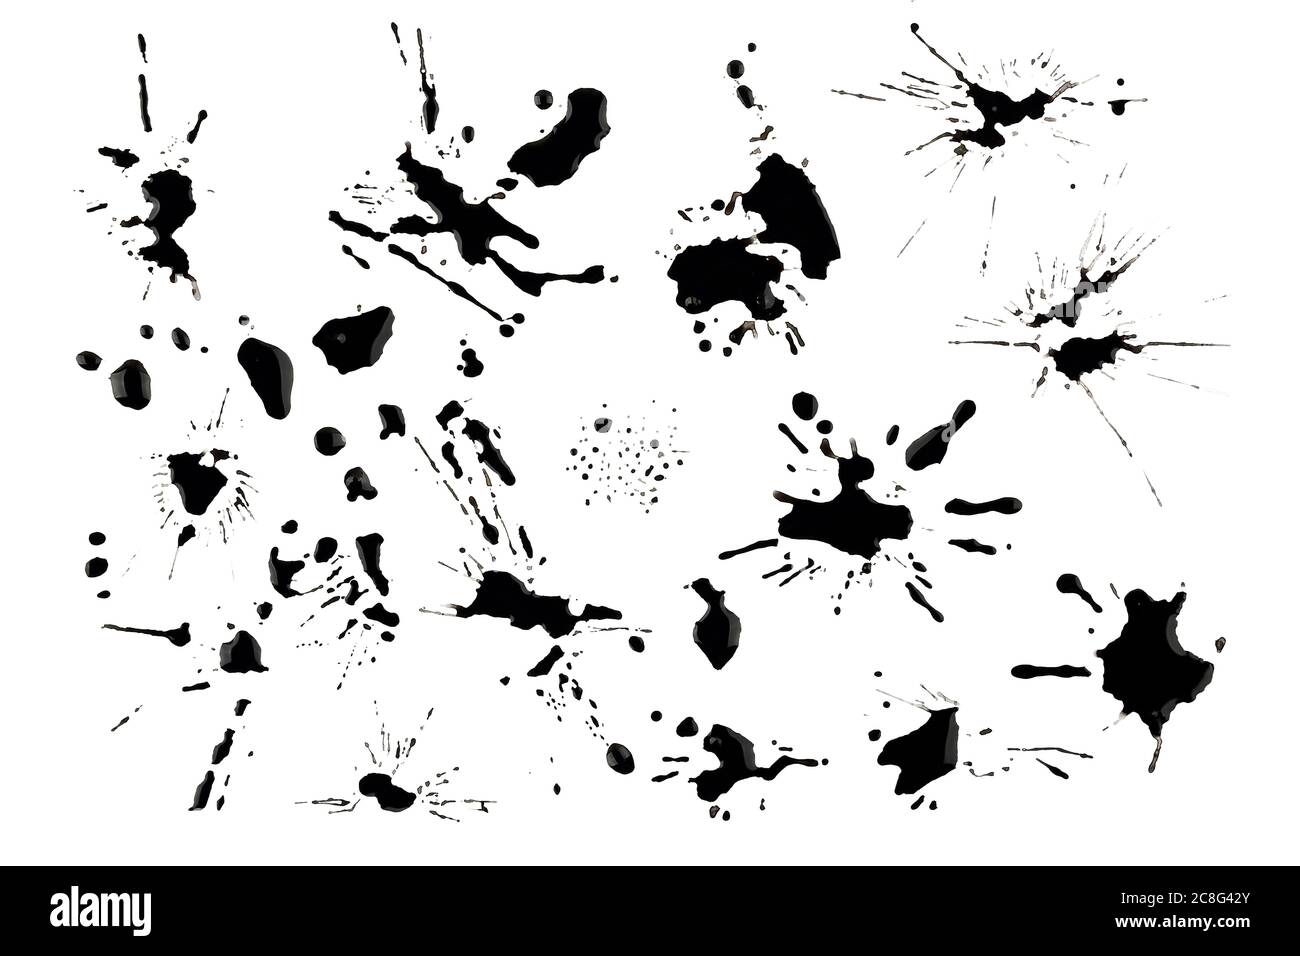 collection of ink splats and blots isolated on white Stock Photo